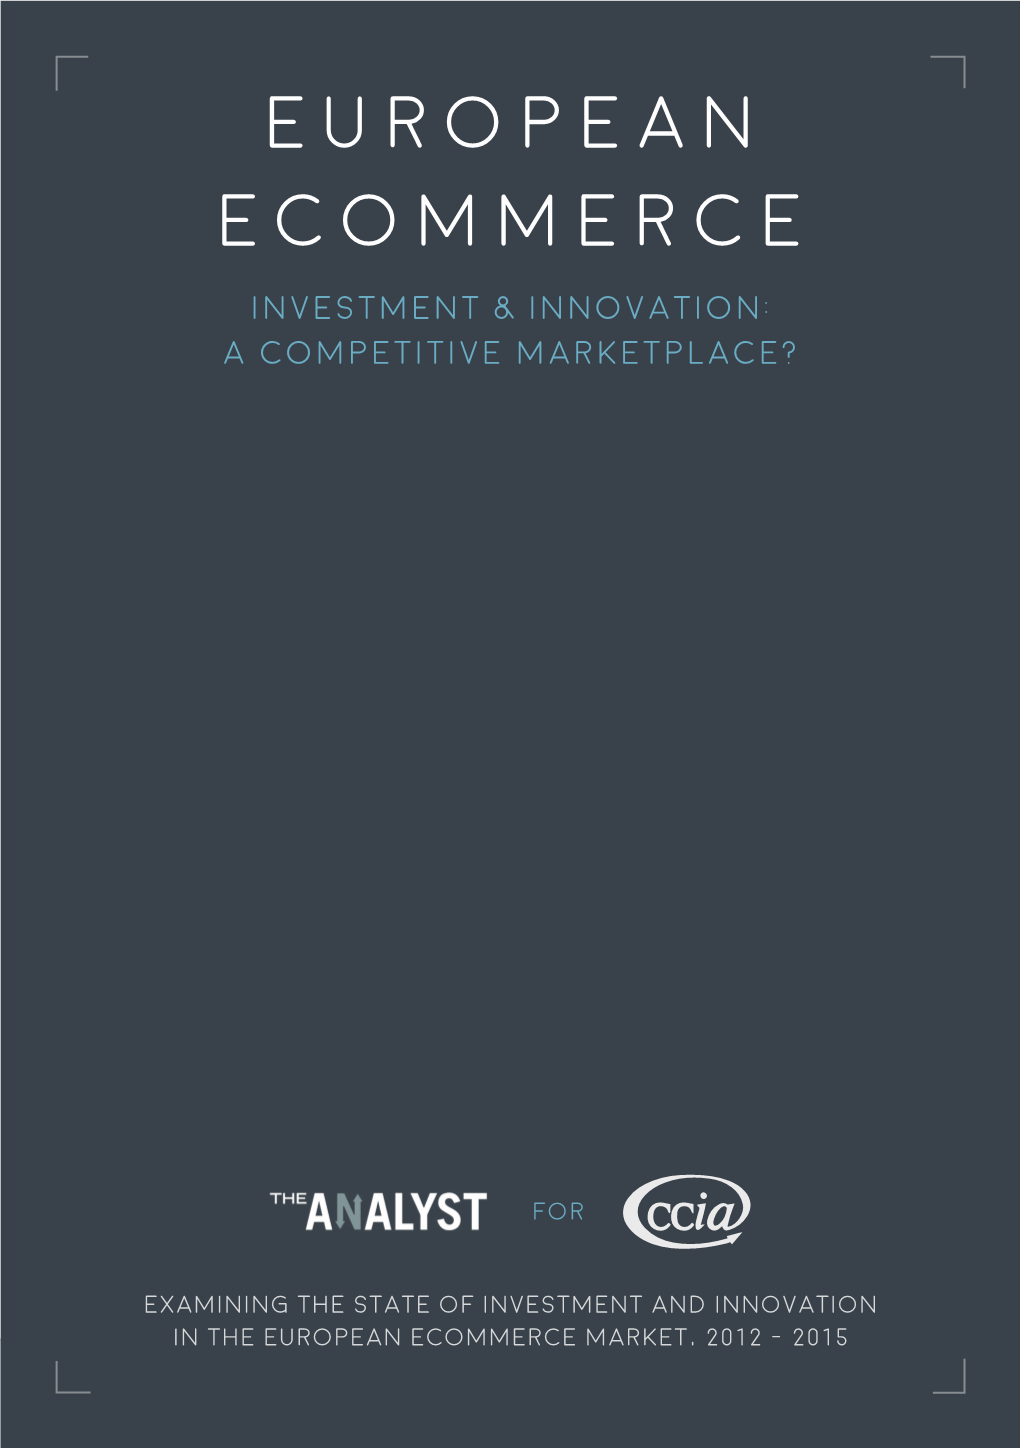 European Ecommerce Investment & Innovation: a Competitive Marketplace?